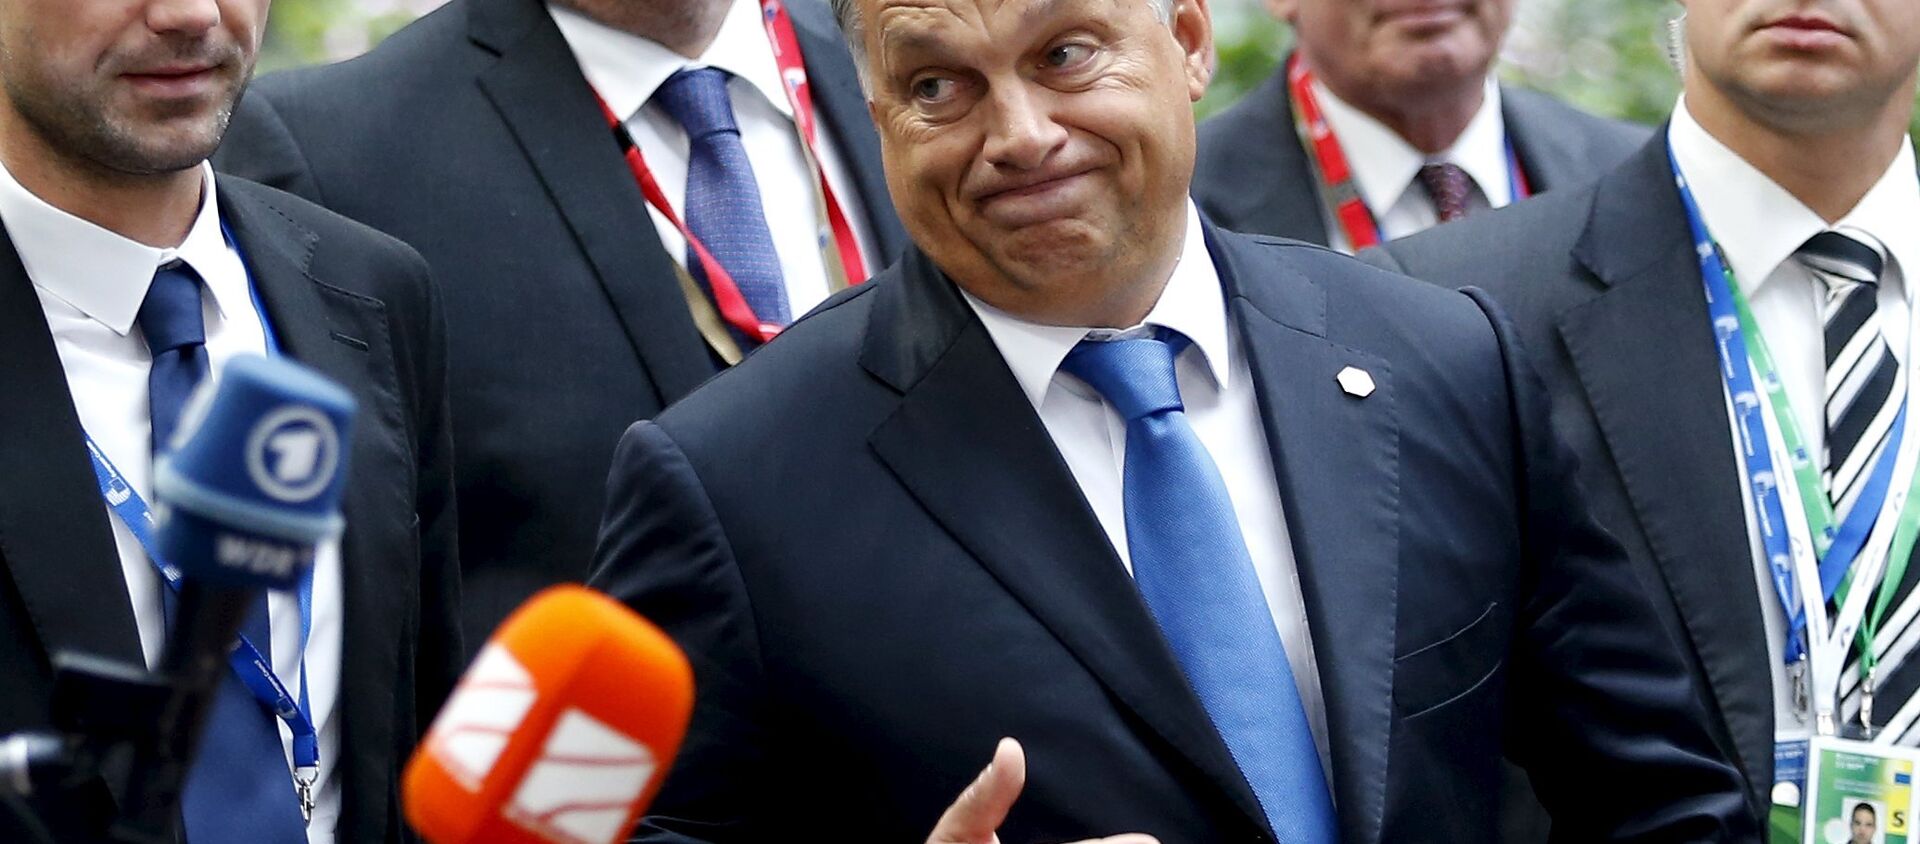 Hungary's Prime Minister Viktor Orban reacts as he arrives at a European Union leaders extraordinary summit on the migrant crisis, in Brussels, Belgium September 23, 2015. - Sputnik Moldova-România, 1920, 14.12.2020